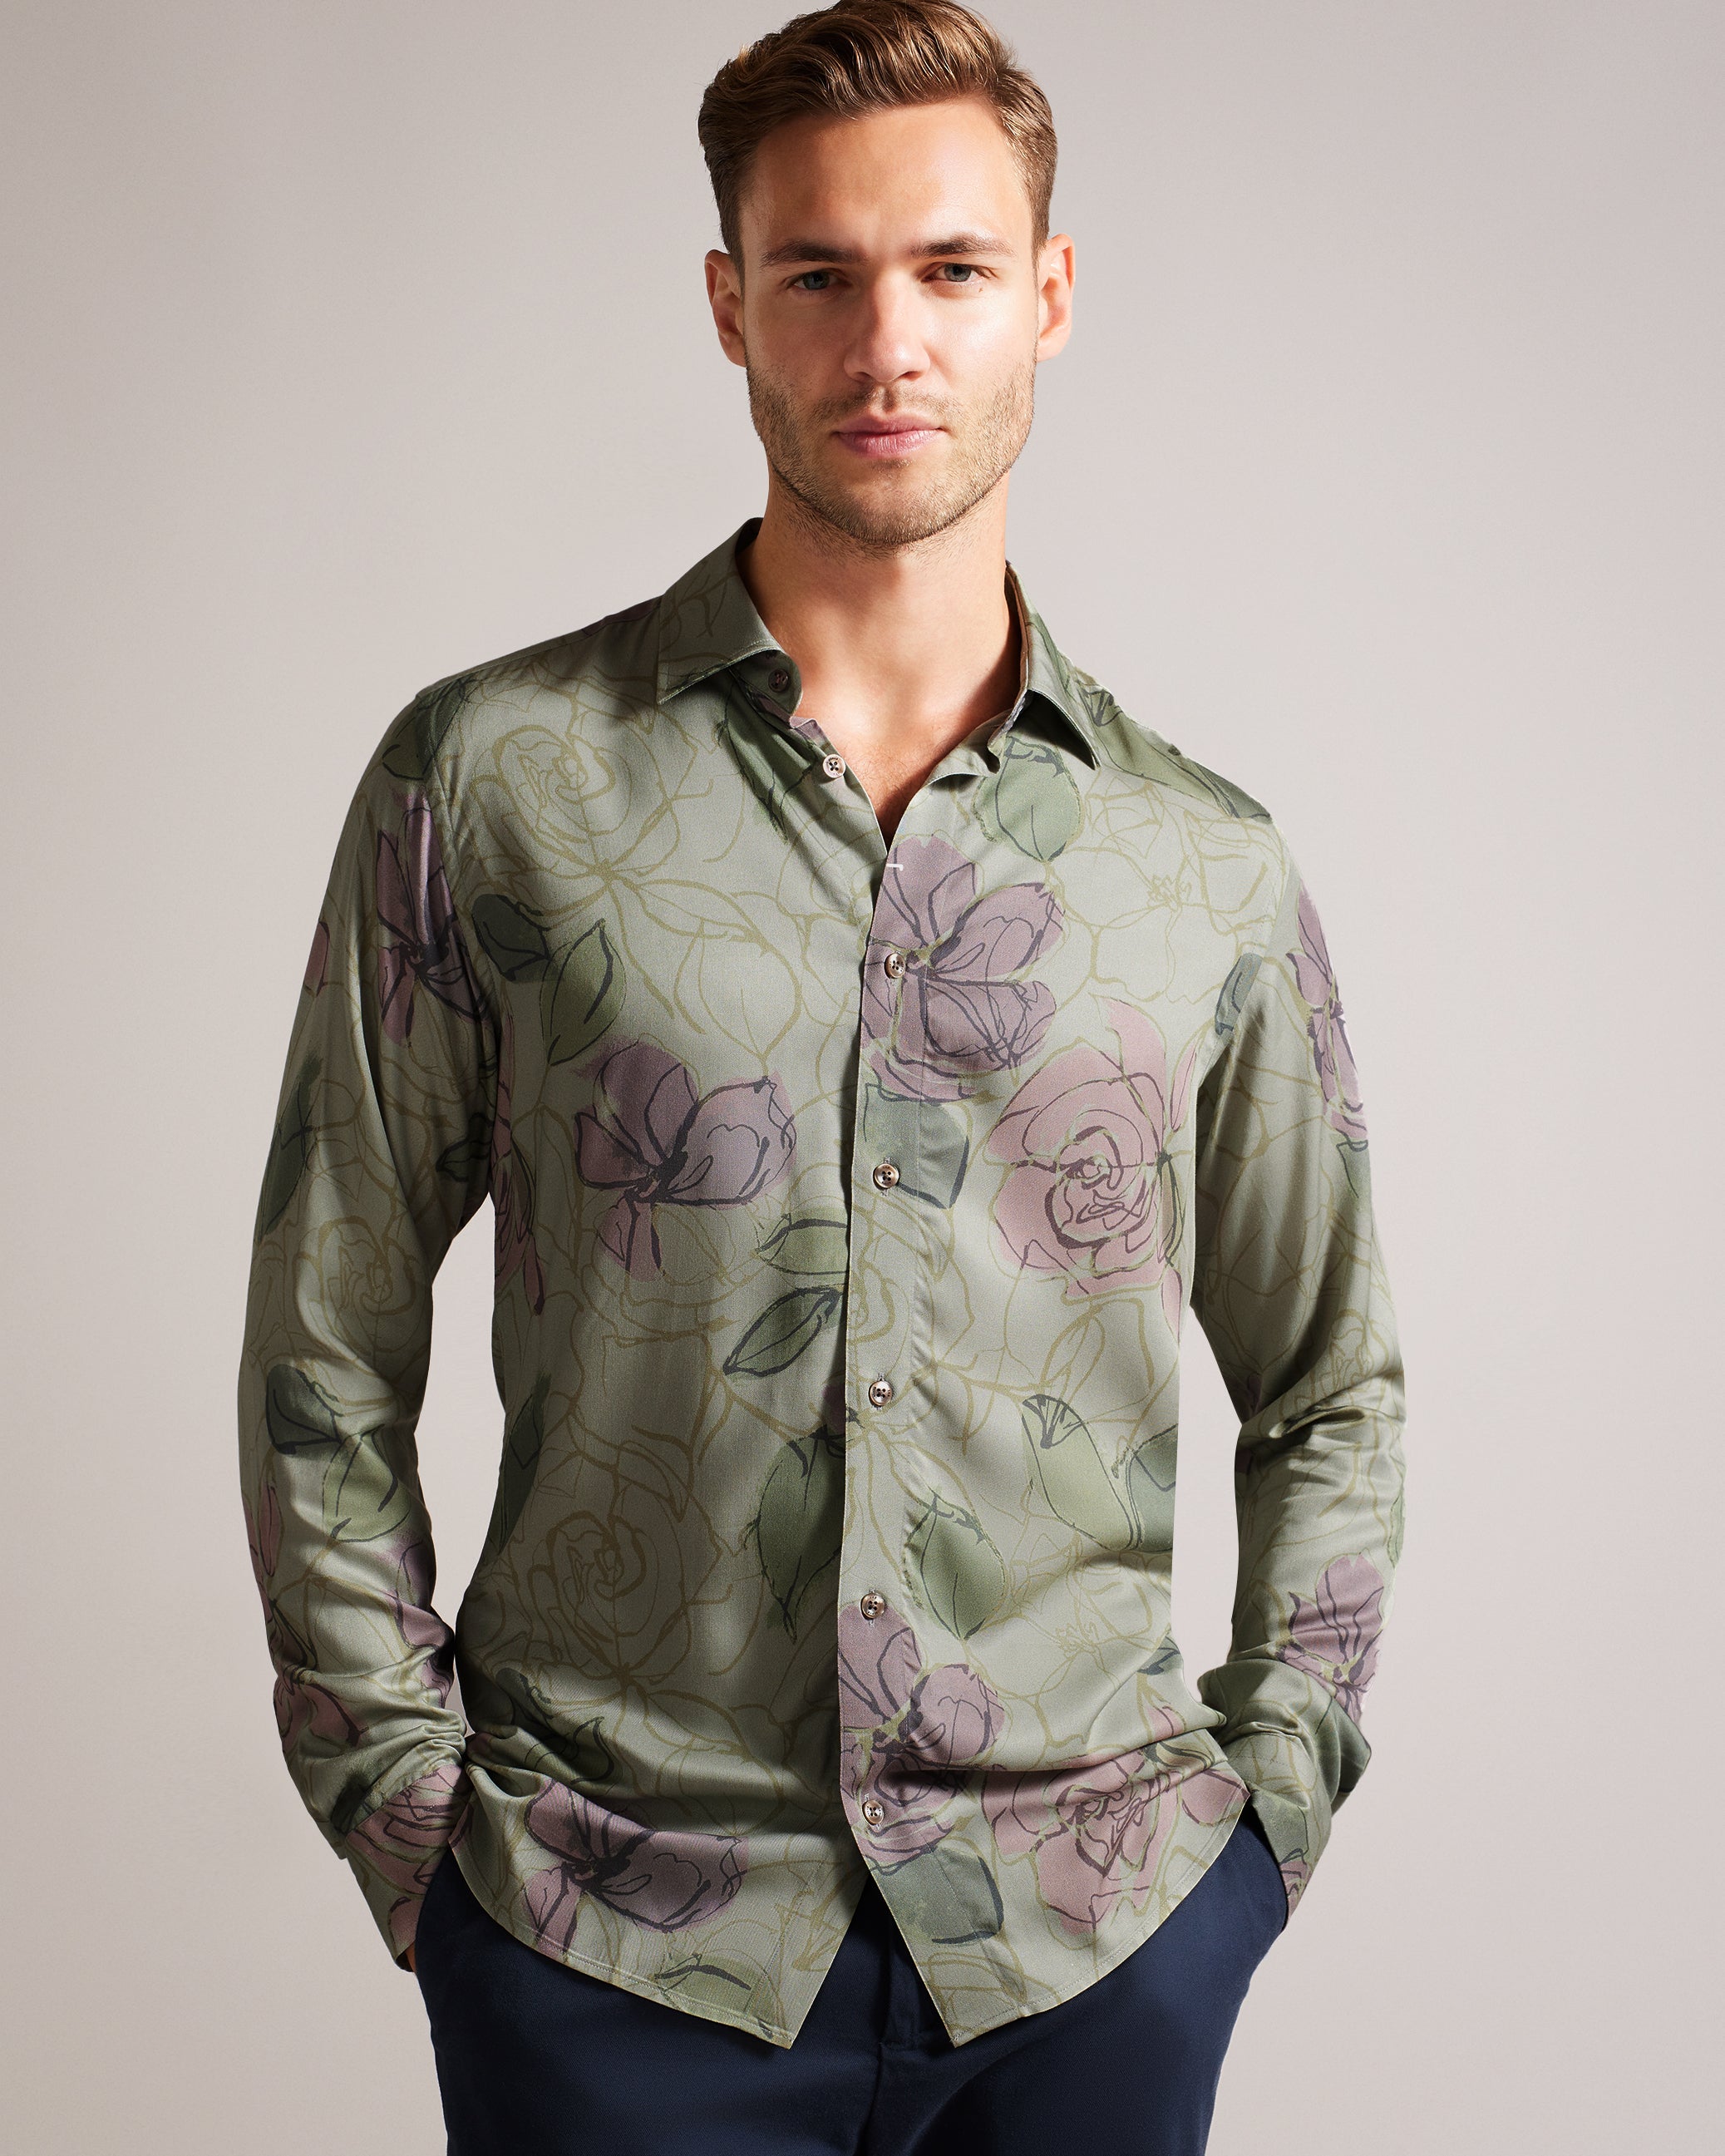 Men's Sale Shirts – Ted Baker, Canada